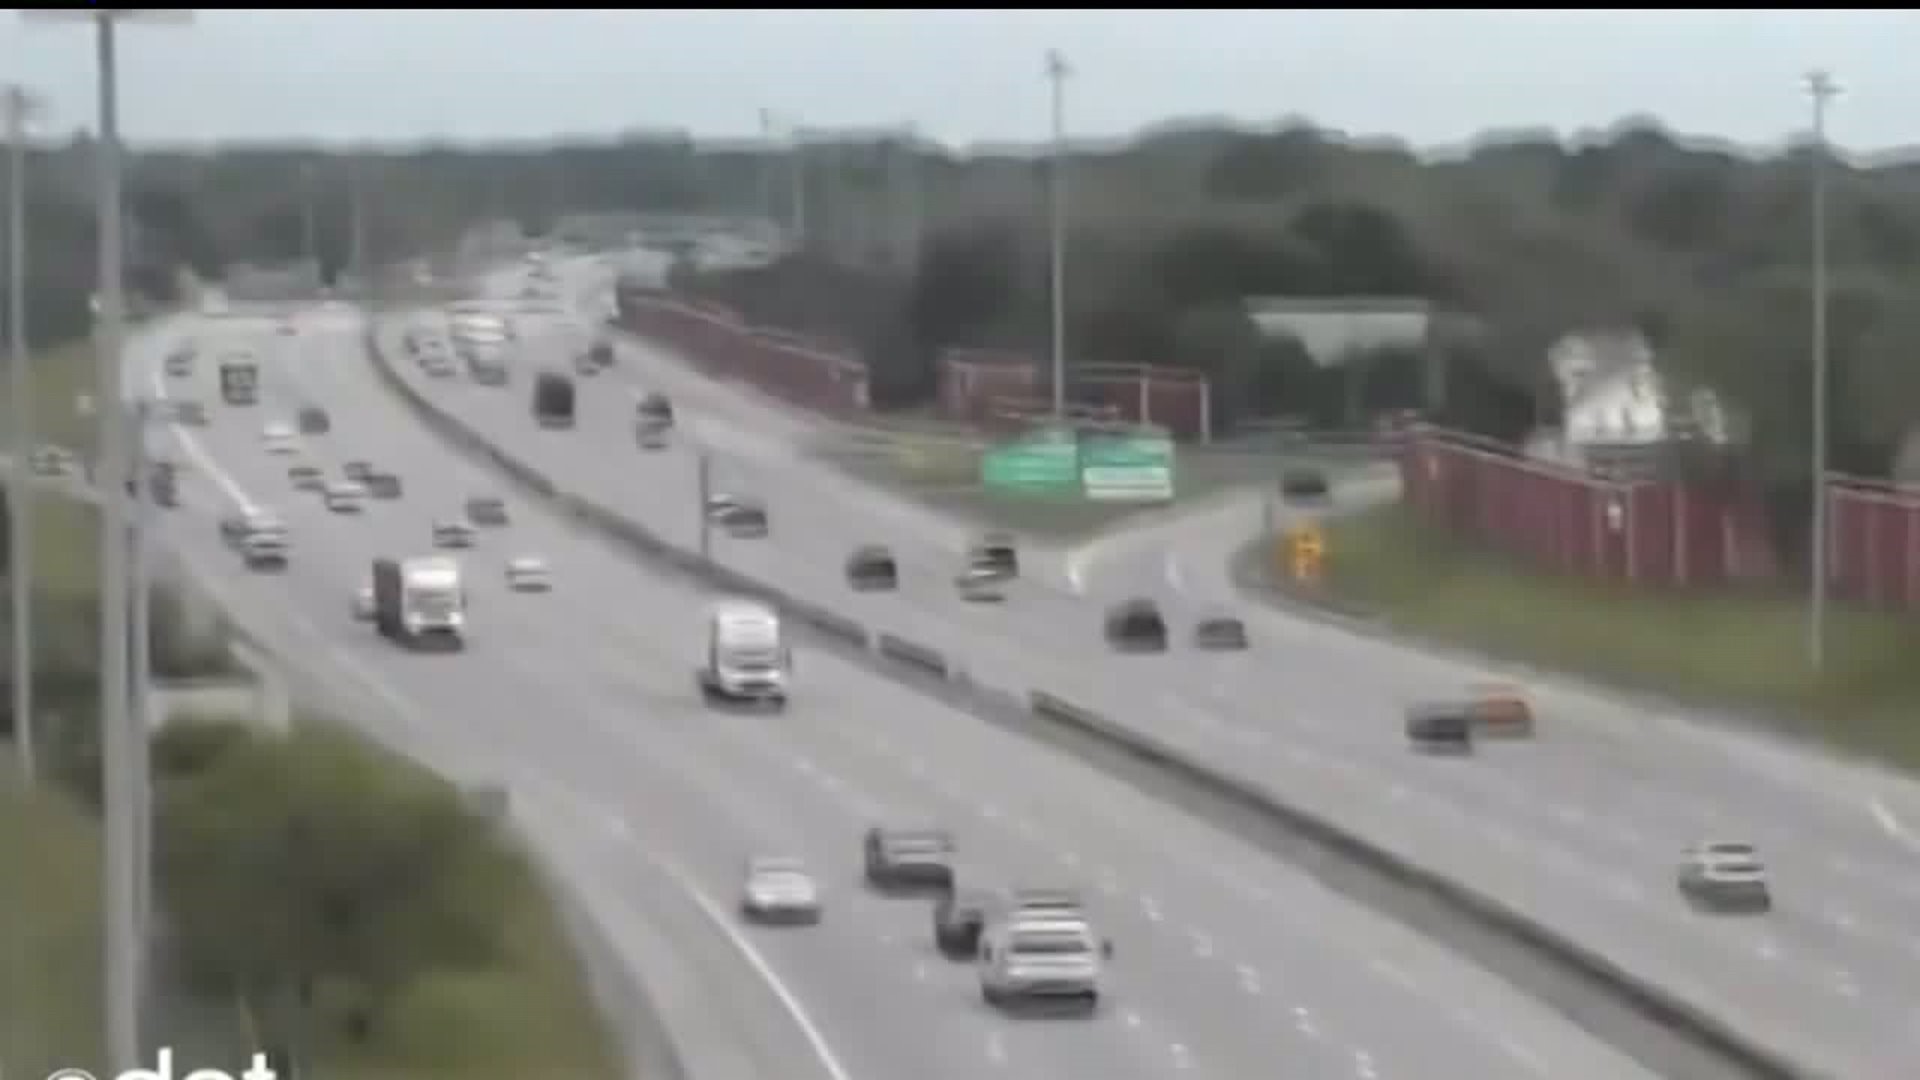 Earthquake rattles traffic cameras in Ohio